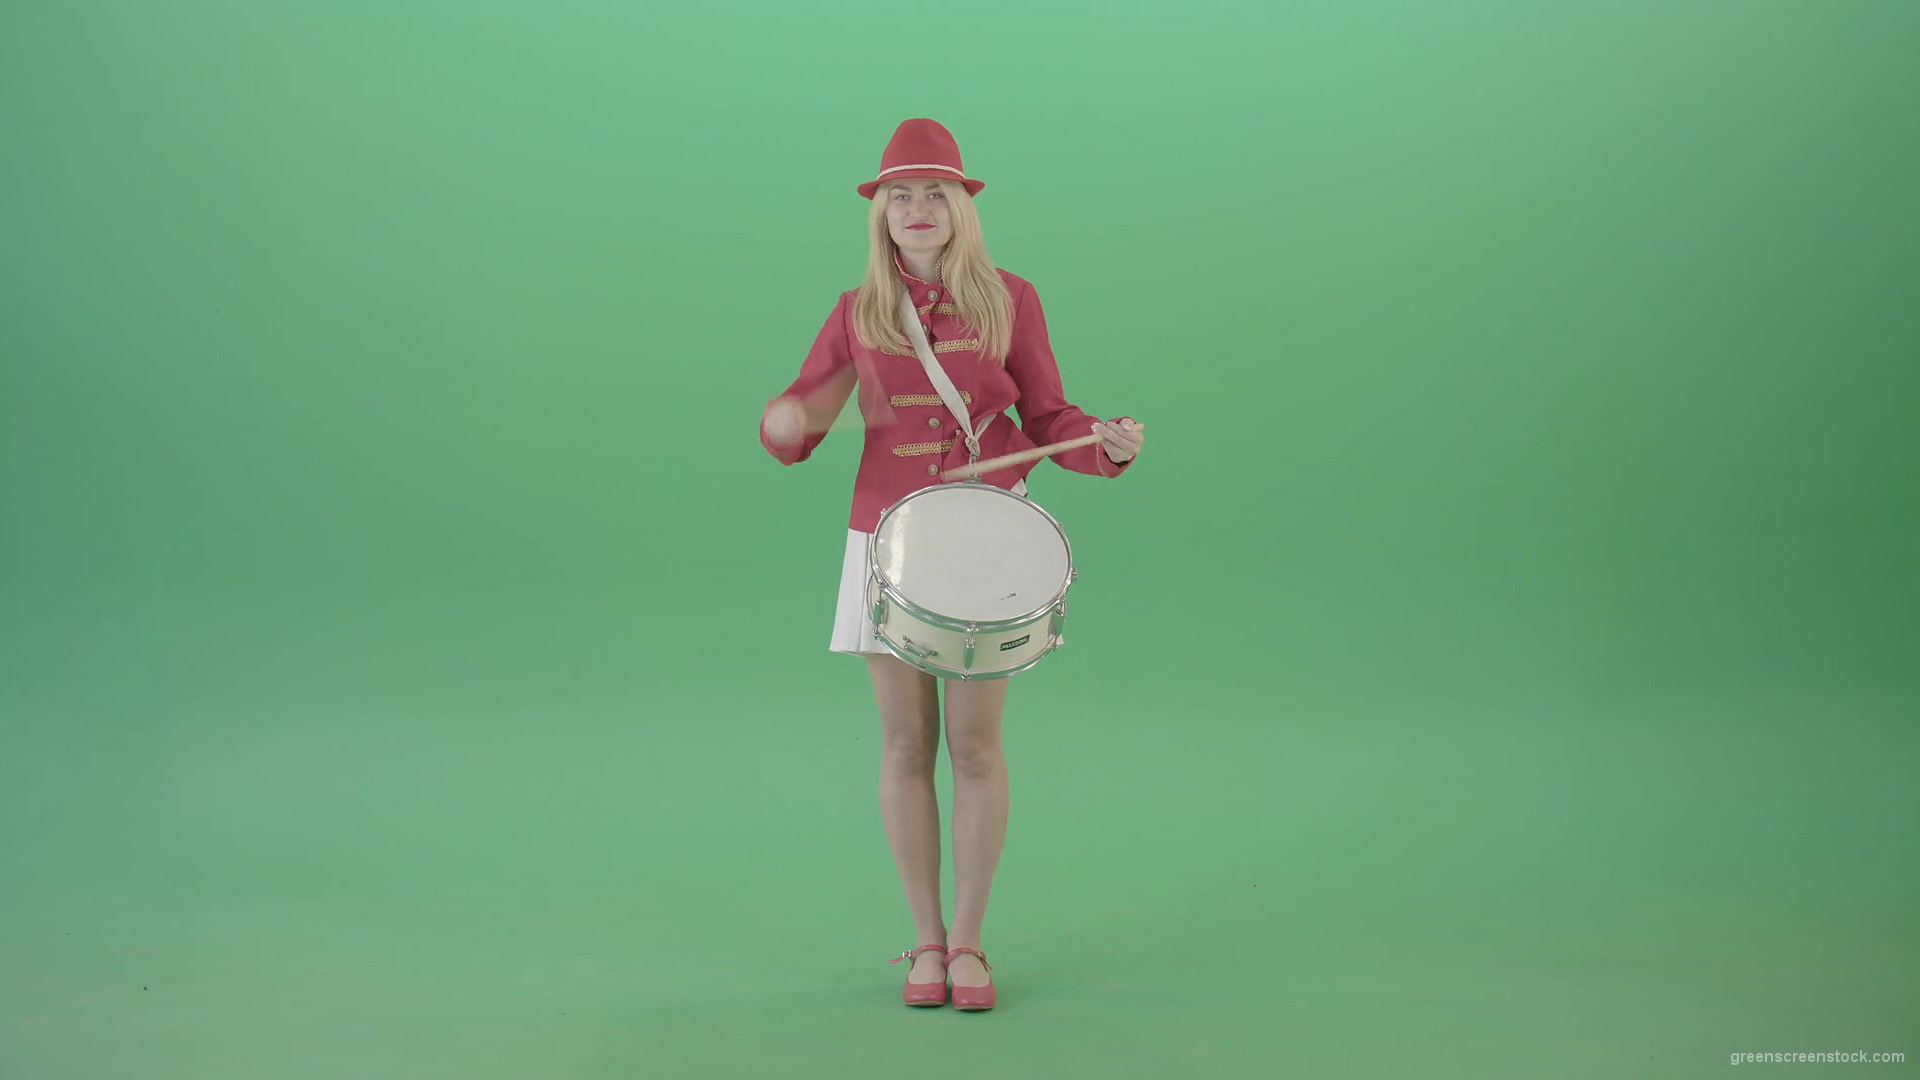 Girl-in-18-Century-military-uniform-play-snare-drum-isolated-on-green-screen-4K-Video-Footage-1920_007 Green Screen Stock